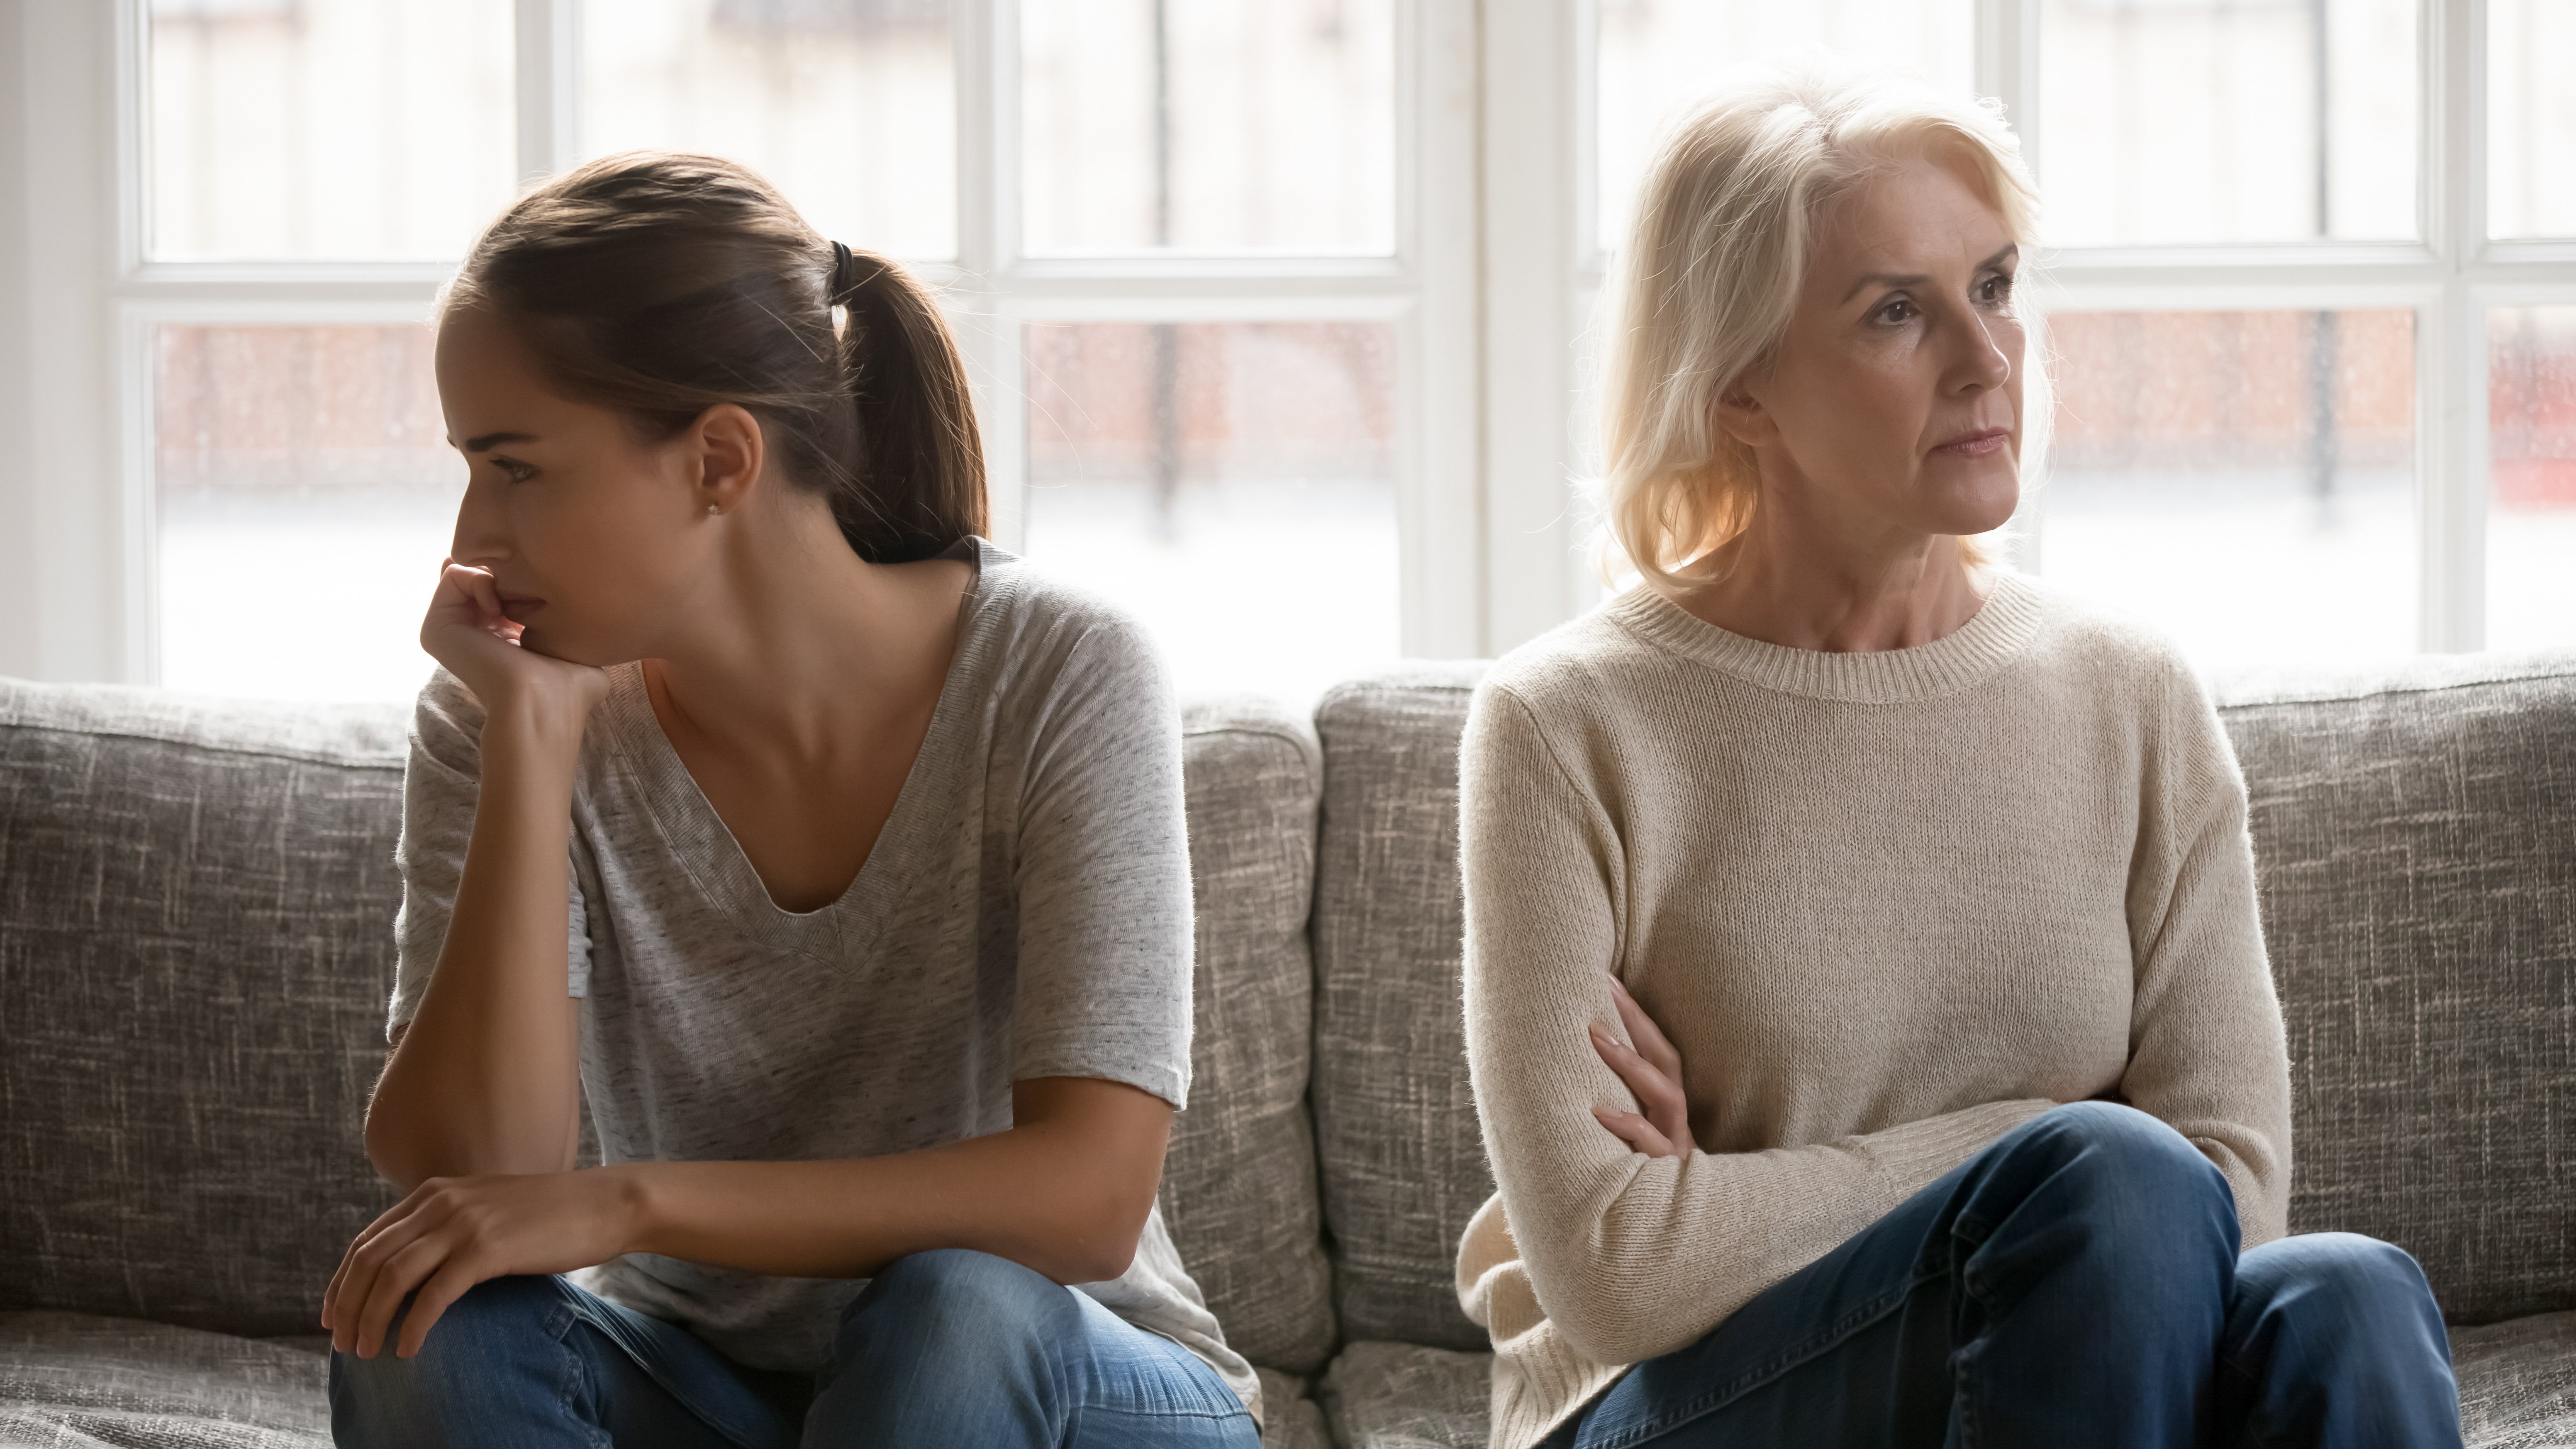 Young woman and elderly woman upset at each other. | Source: Shutterstock